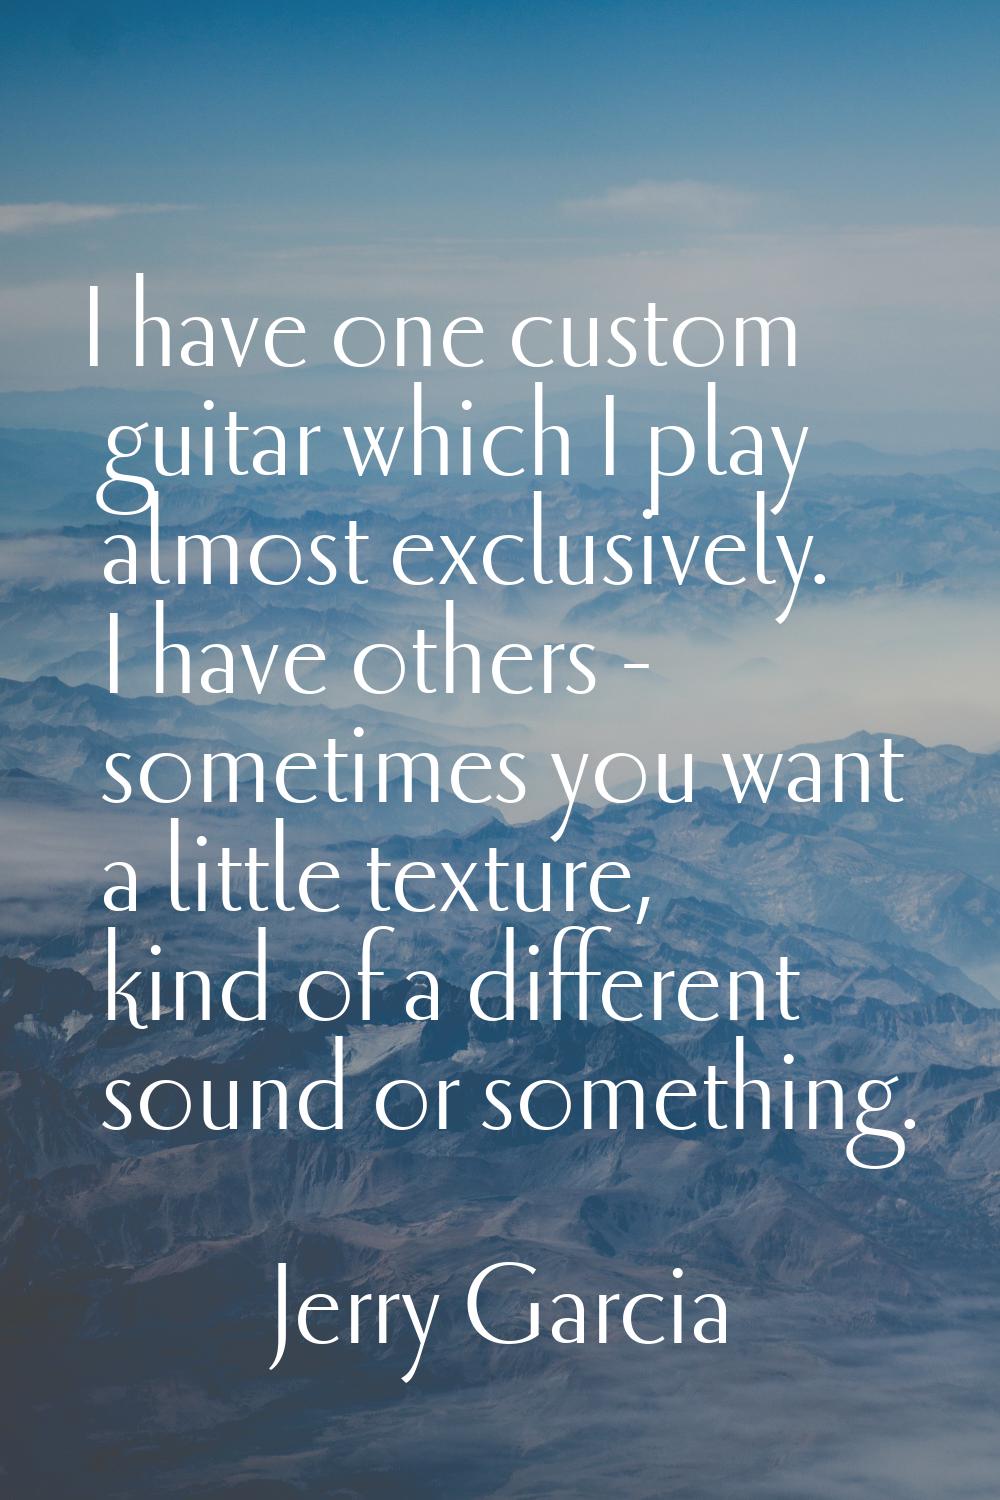 I have one custom guitar which I play almost exclusively. I have others - sometimes you want a litt